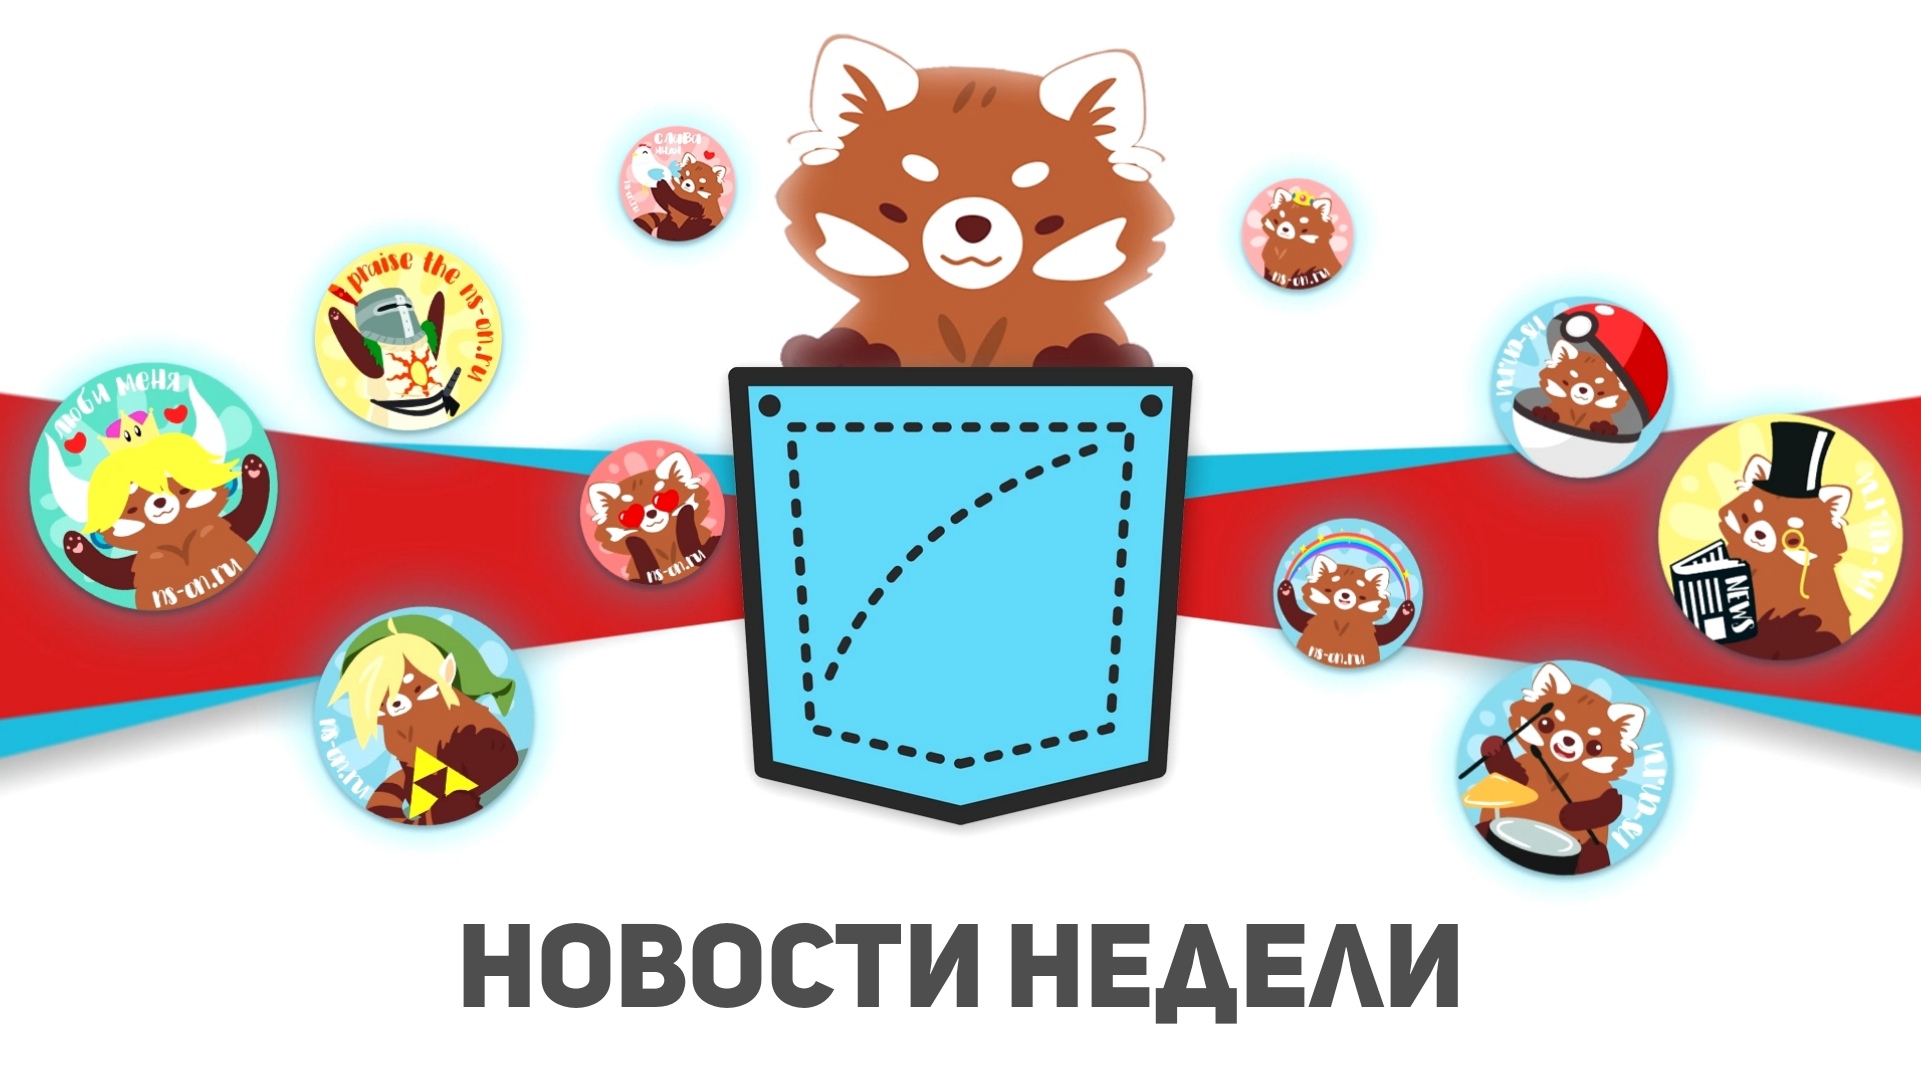 You are currently viewing Новости недели Nintendo Switch (24.05 – 30.05)